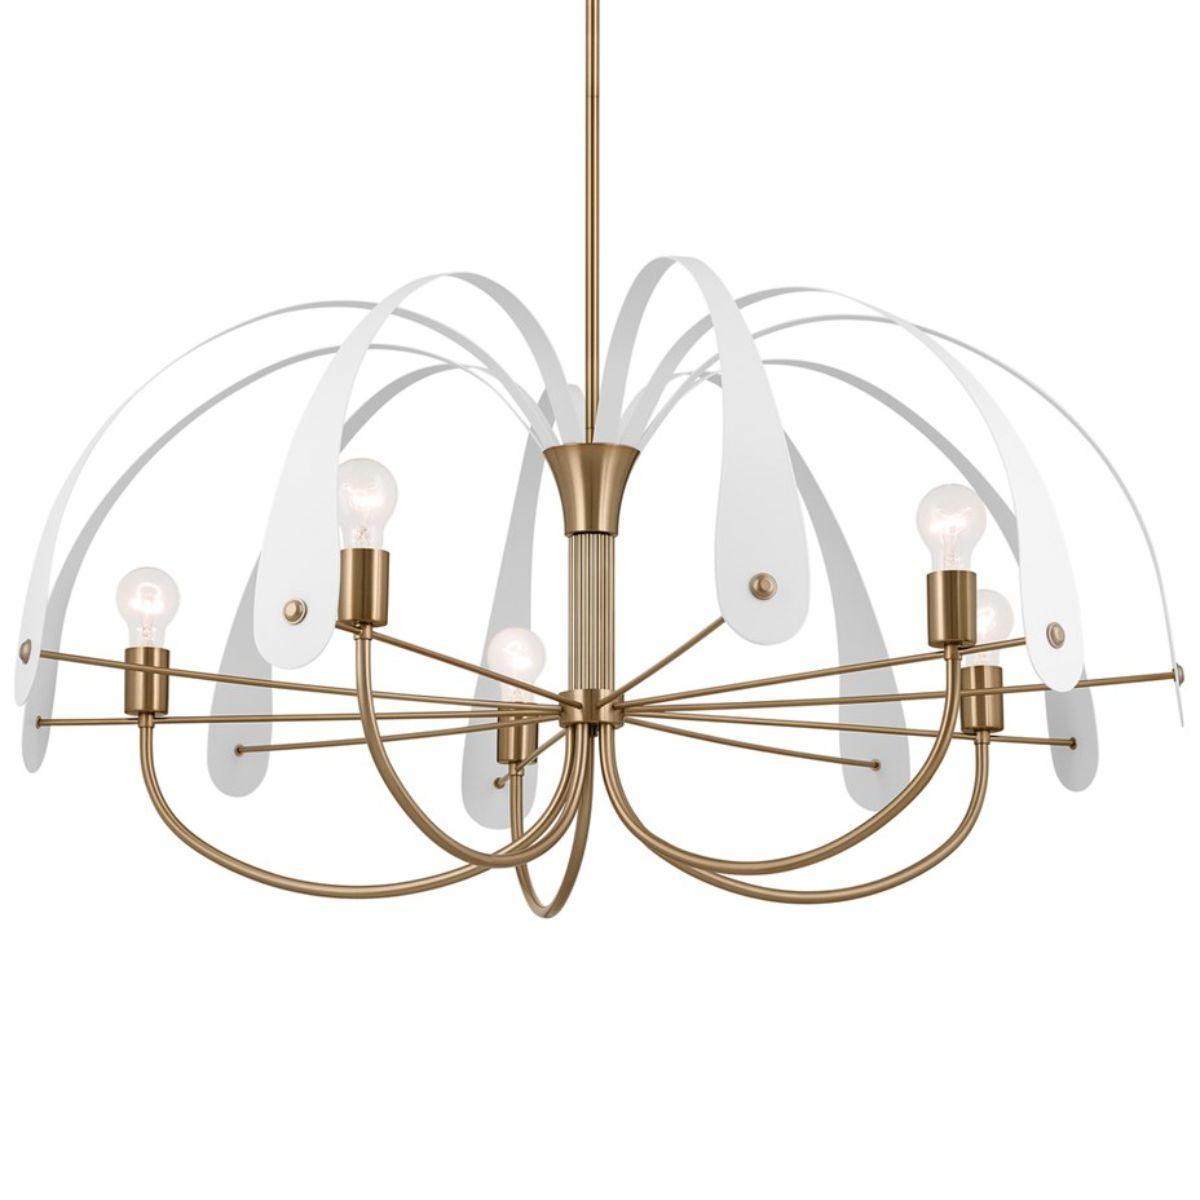 Petal 43 in. 5 Lights Chandelier Champagne Bronze and White Finish